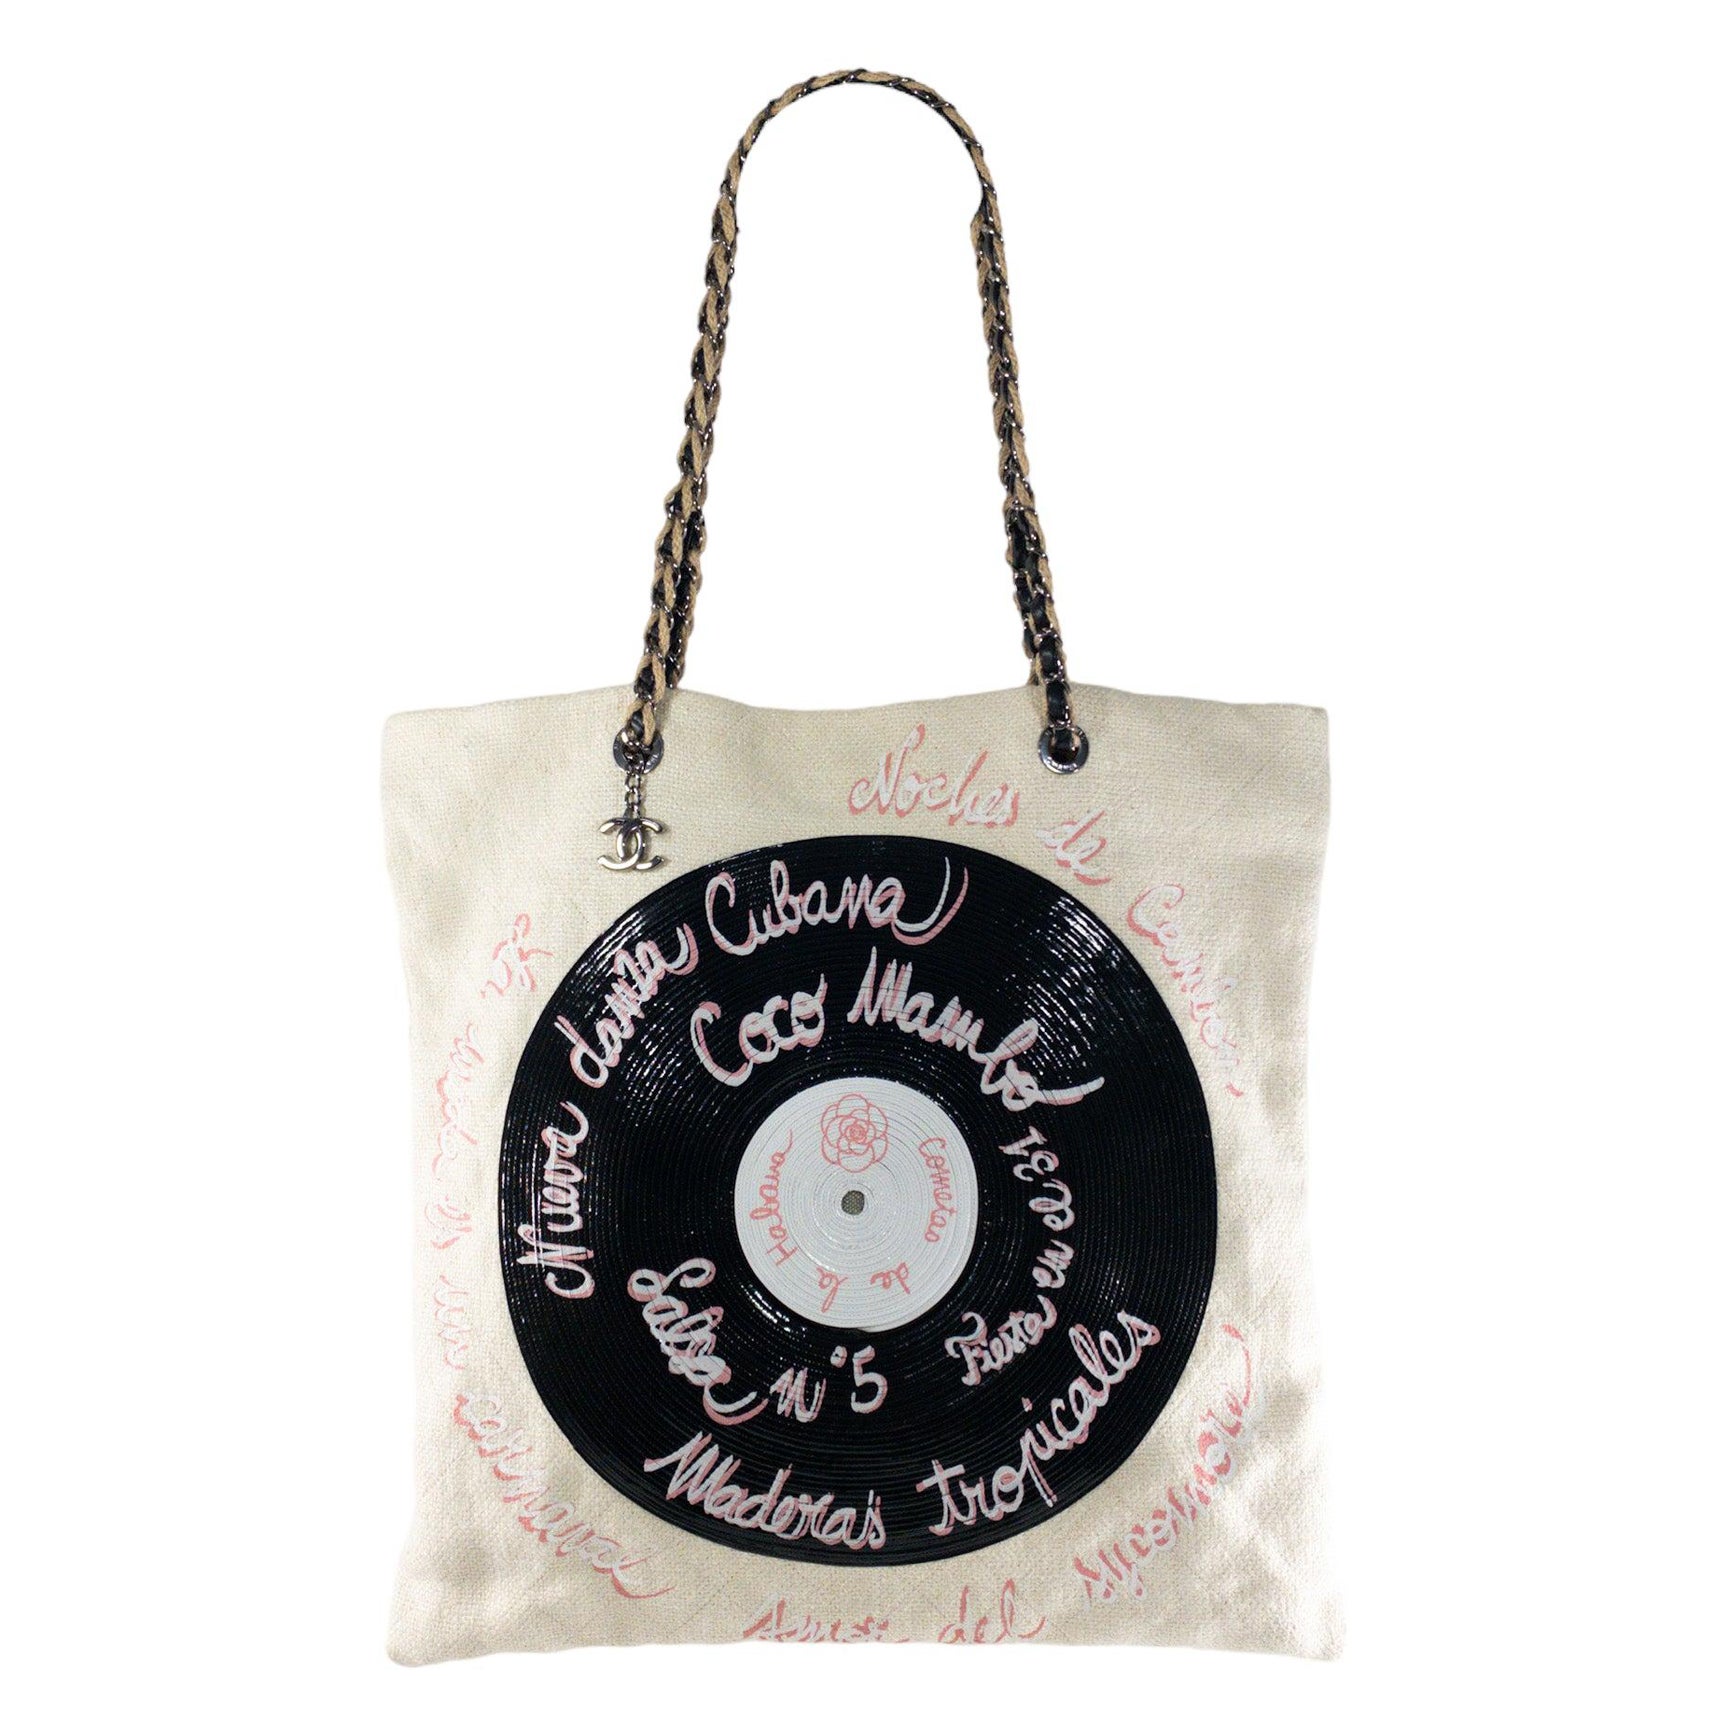 Chanel Beige Coco Cuba Record Embroidered Tote For Sale at